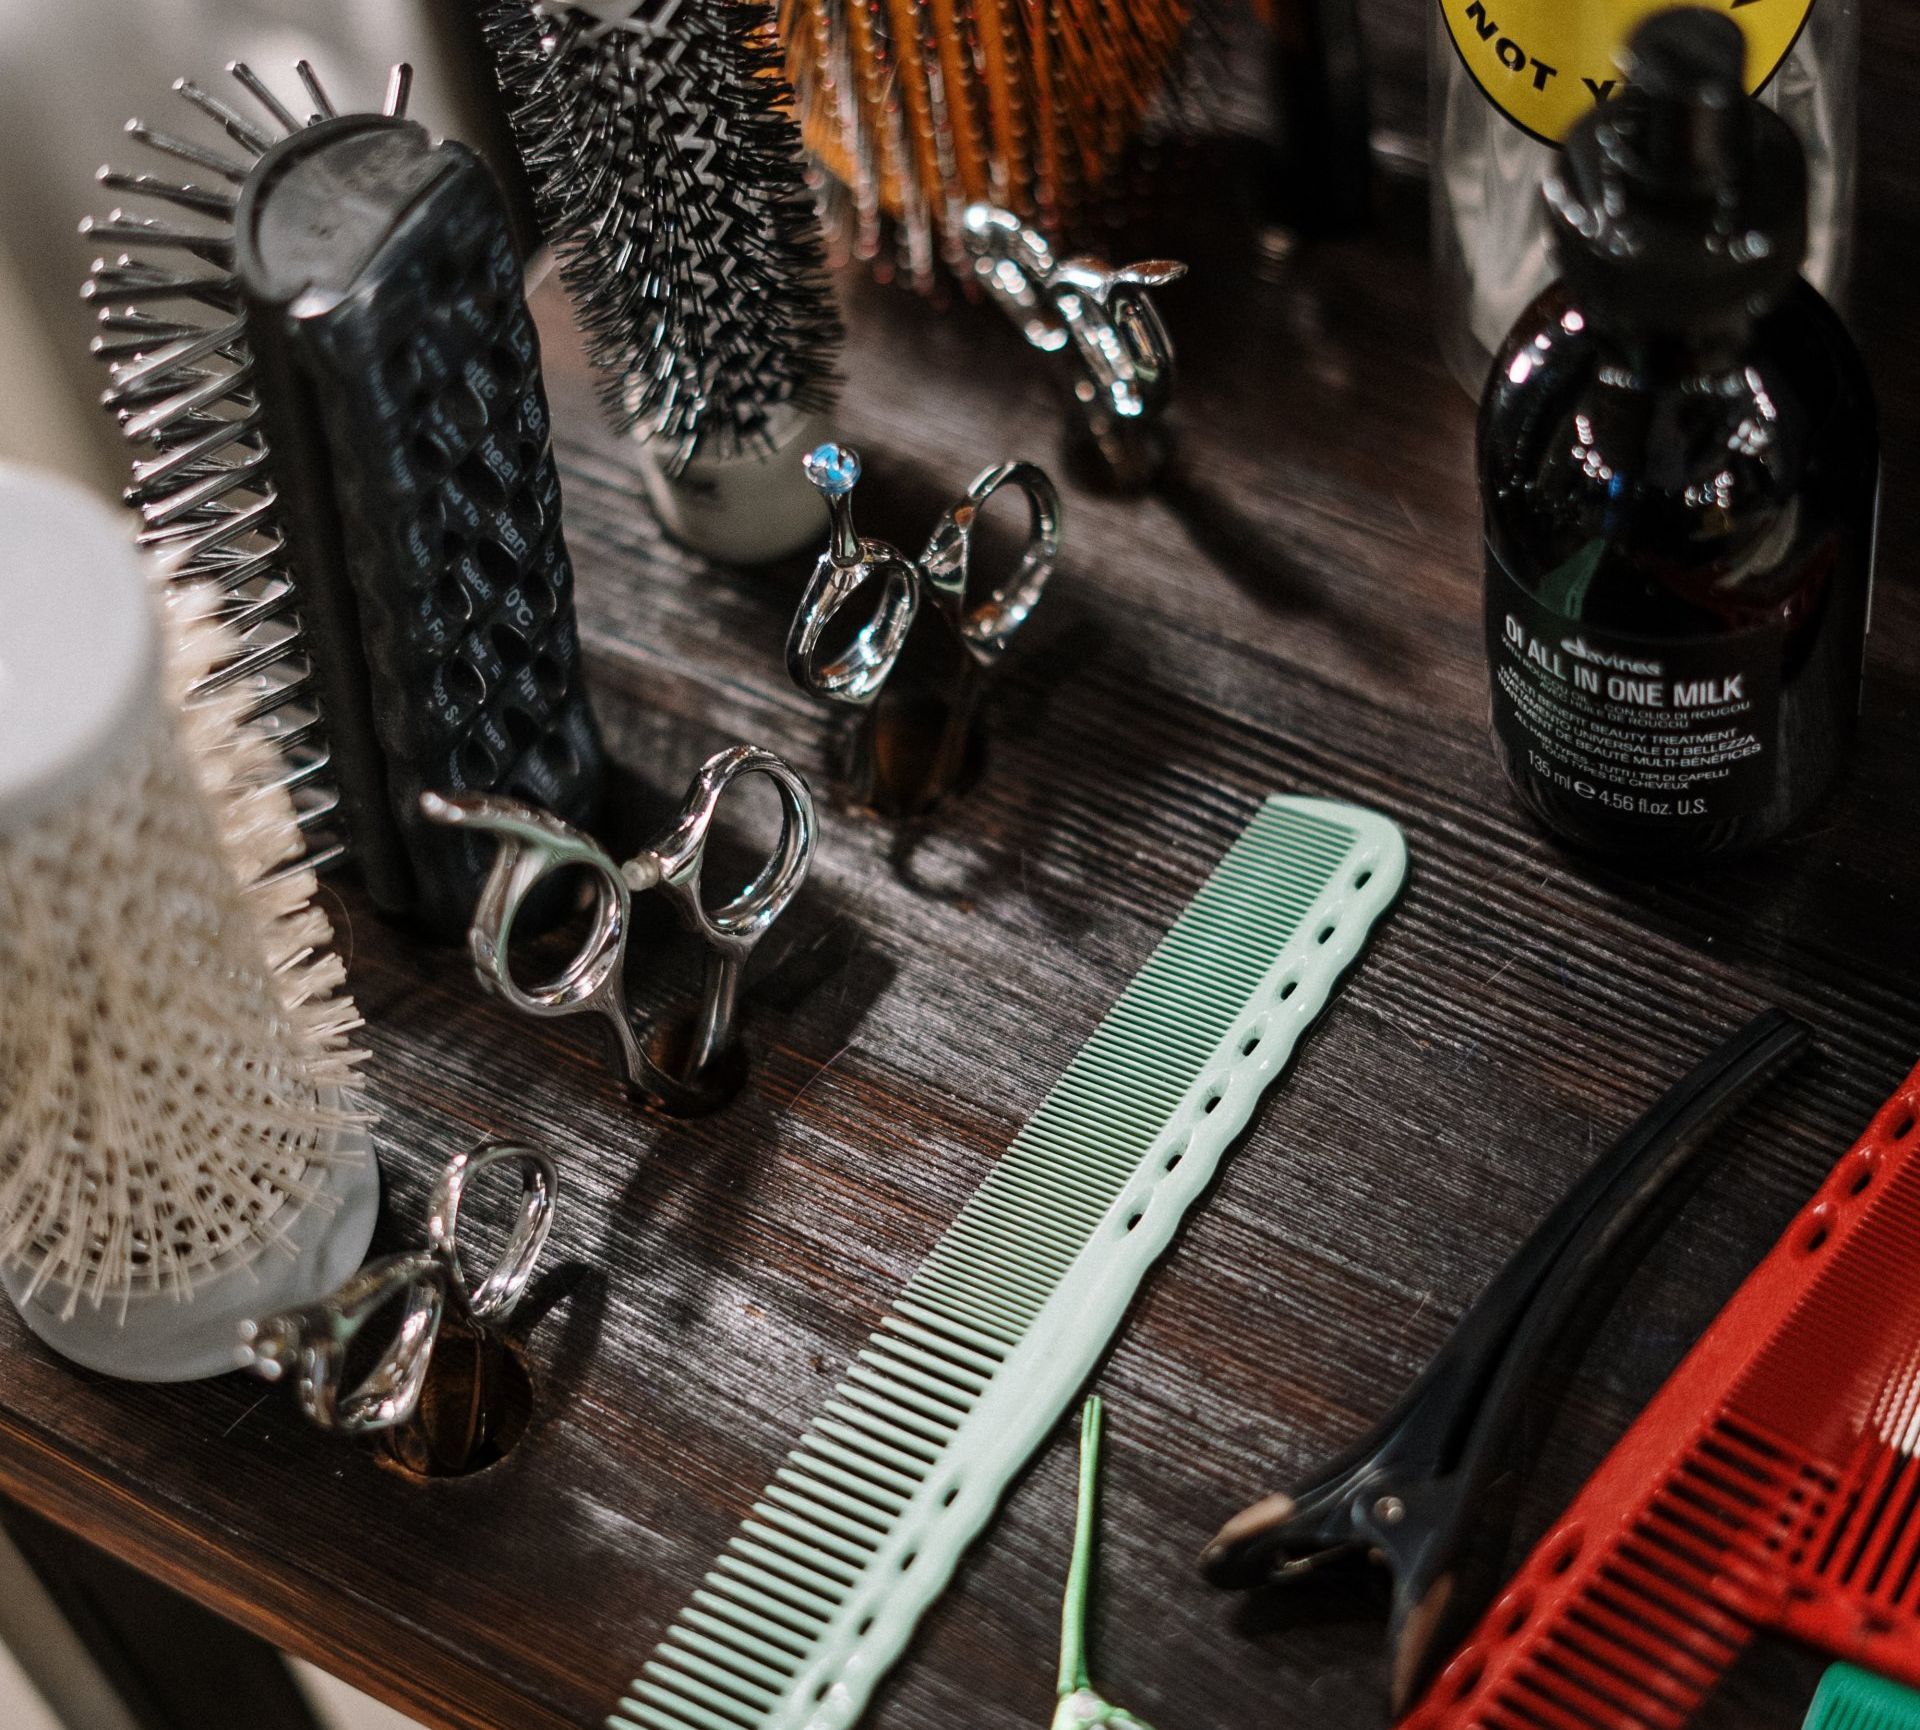 Hair care tools